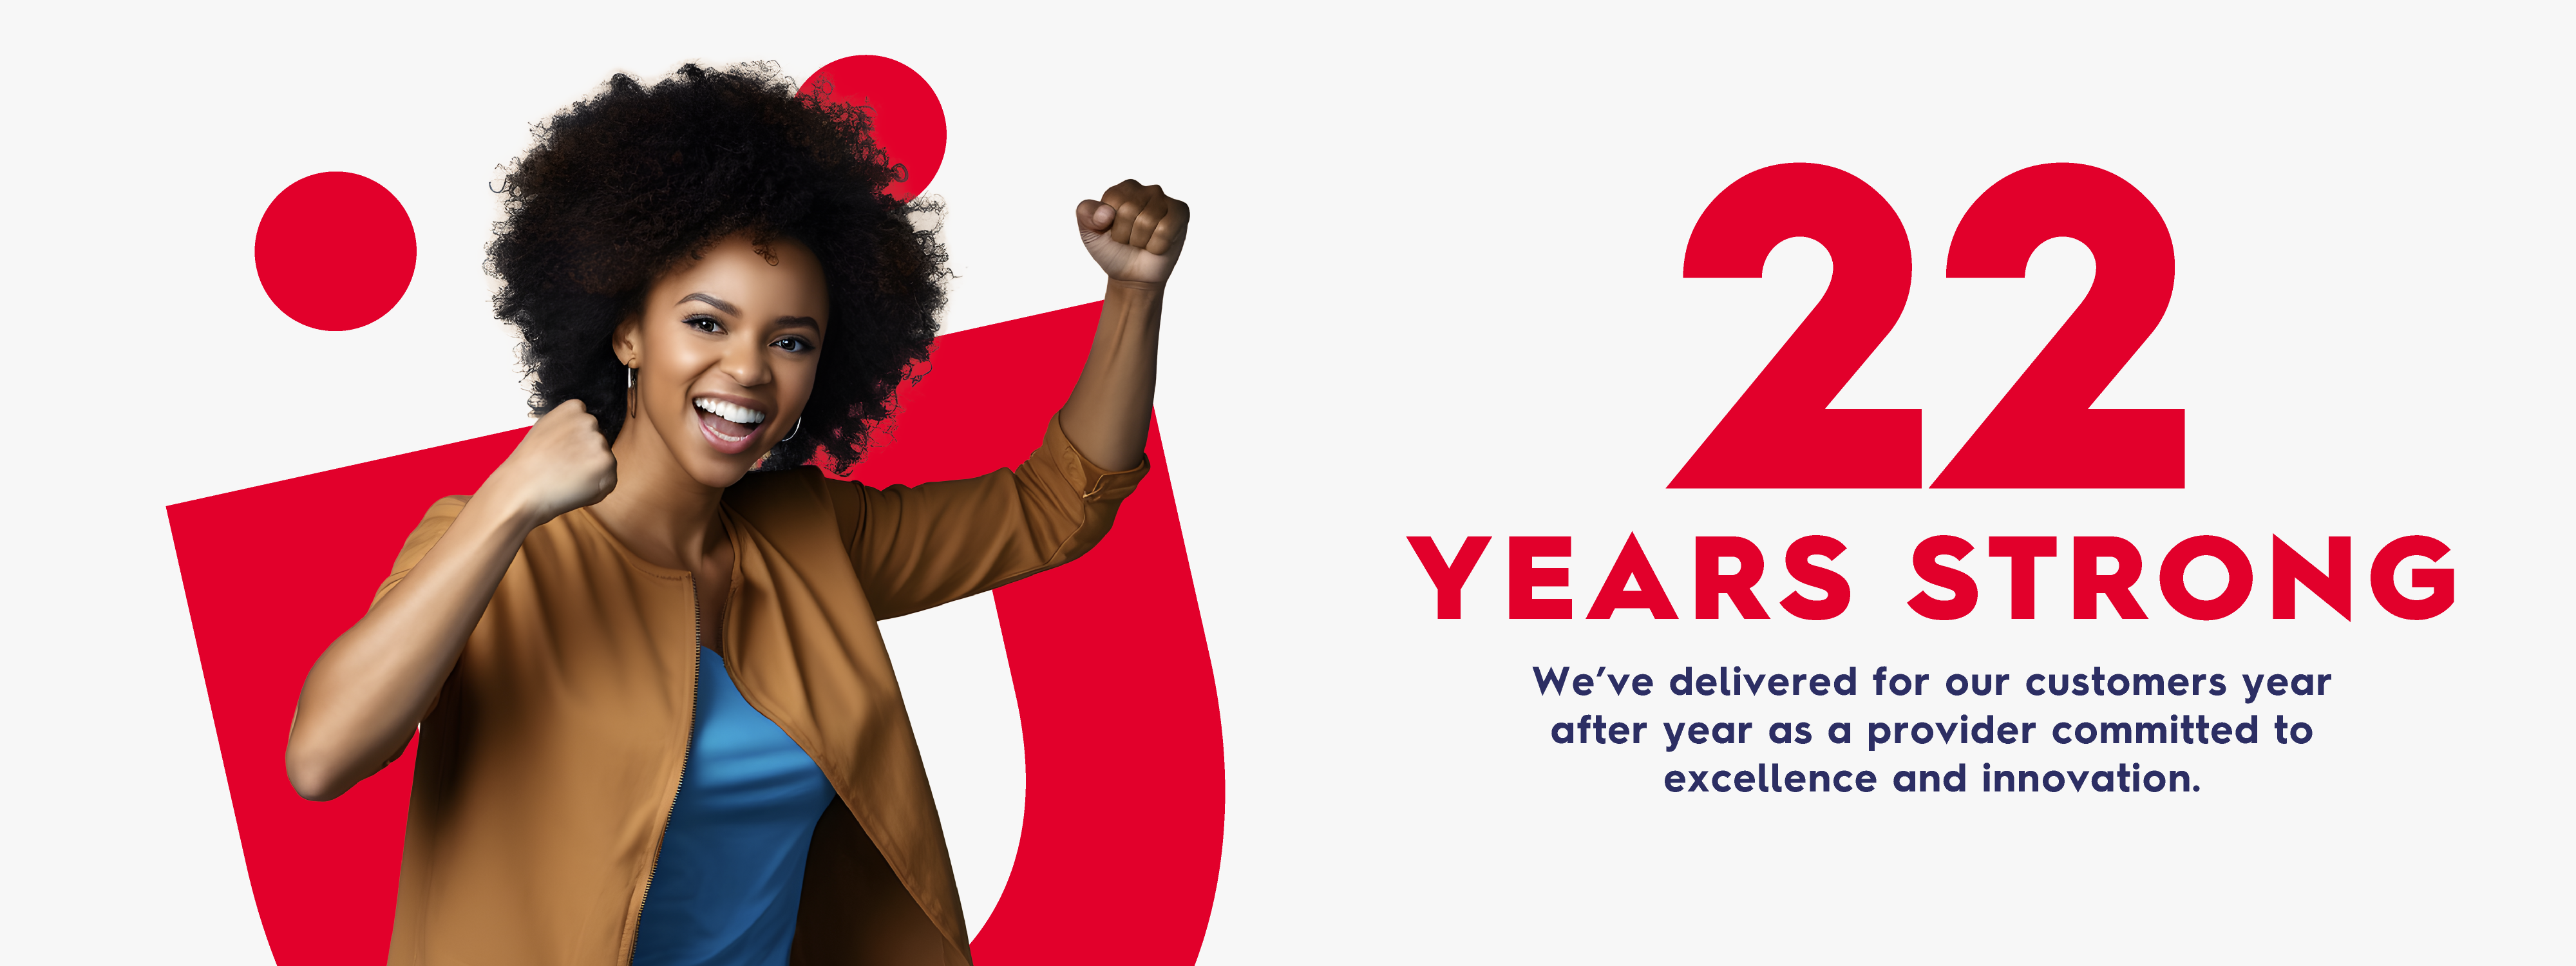 20231030_Digicel__About Us__Desktop-22 Yrs Strong.png